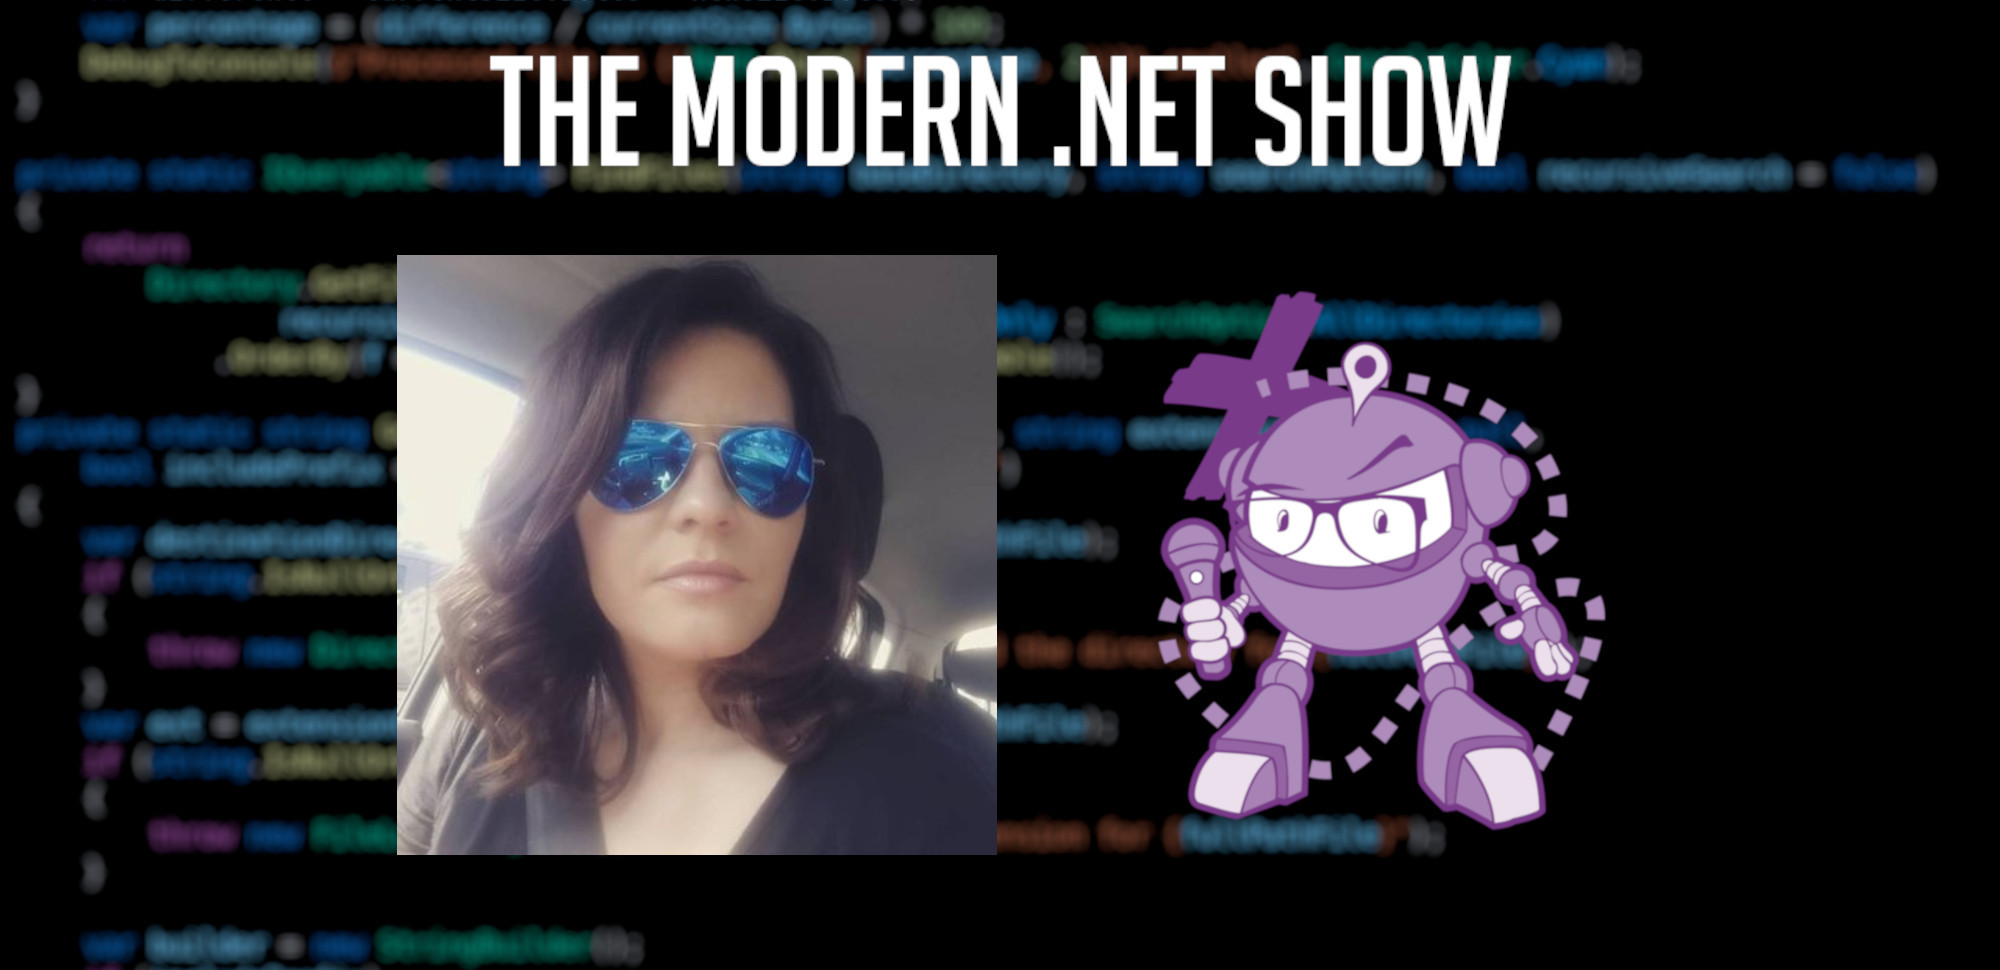 A blurry image of source code, too blurry to read, take the place of the background. Layered over that are the headshot of Irina Dominte and a purple robot holding a microphone; these are on either side of the centre of the image. Above both is the heading 'THE MODERN .NET SHOW' in bold, white text.